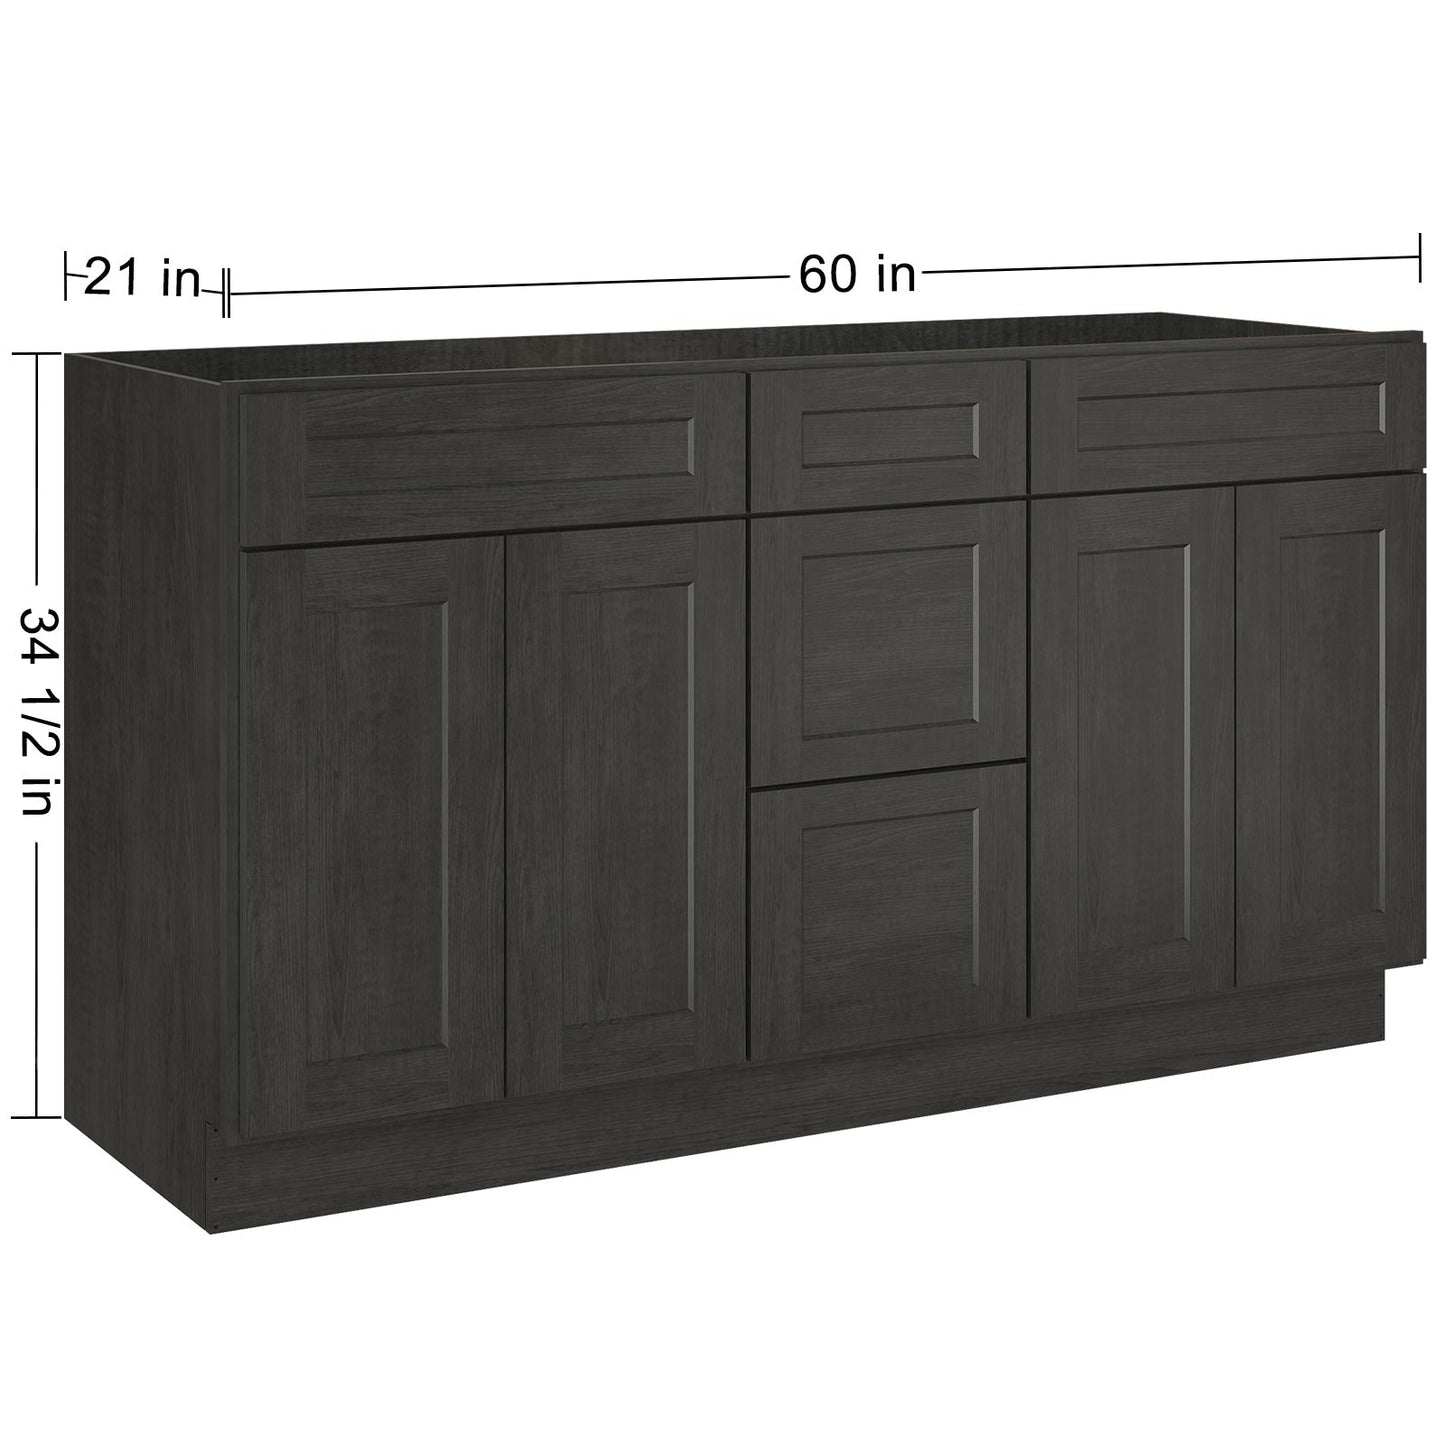 21"D Birch Solid Wood X 60"W X 34-1/2"H Vanity Sink Drawer Cabinet Wthout Top VSDB60